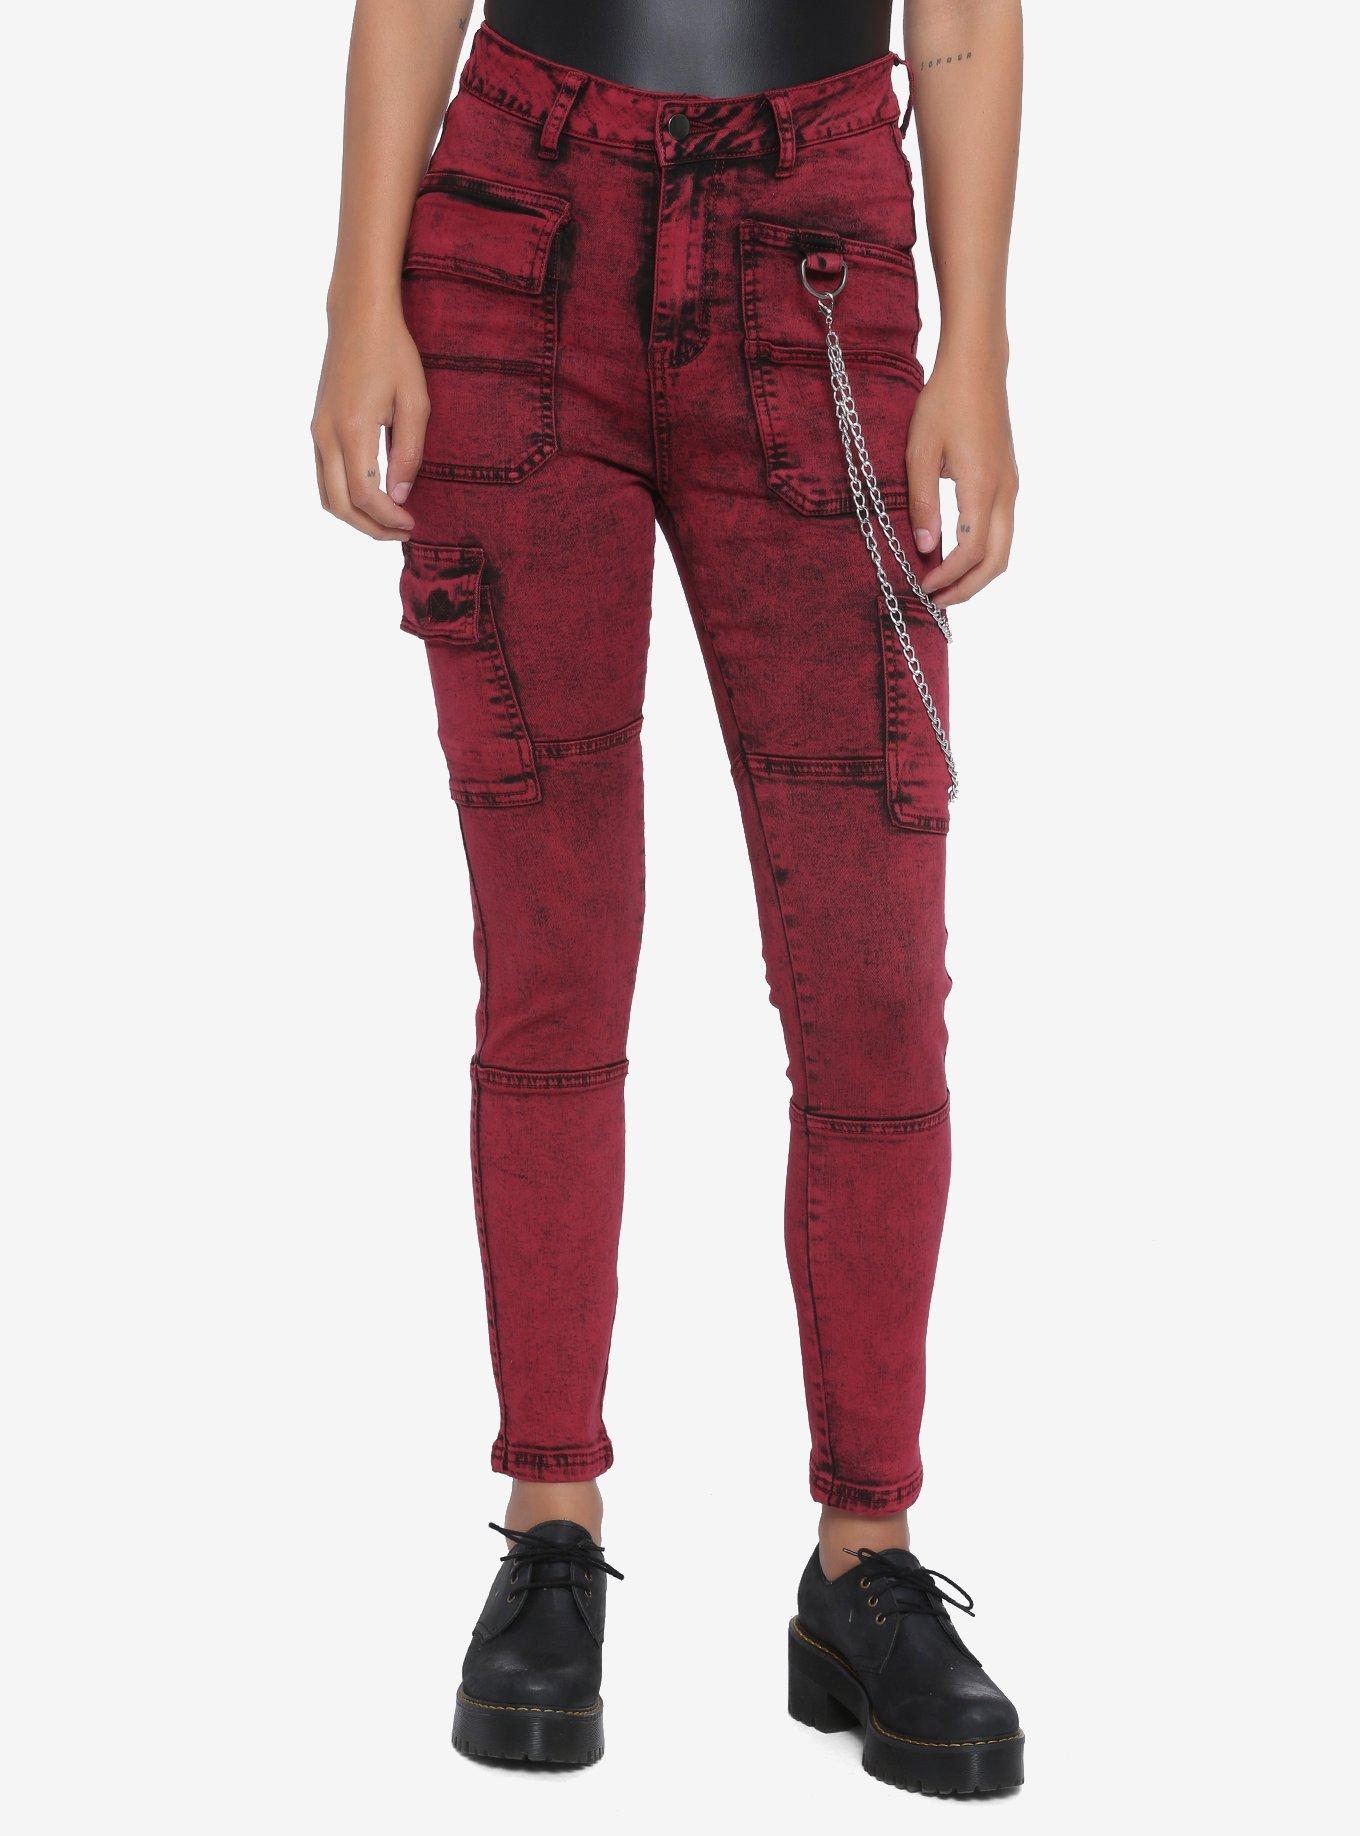 Pockets & Chains Red Washed Skinny Jeans